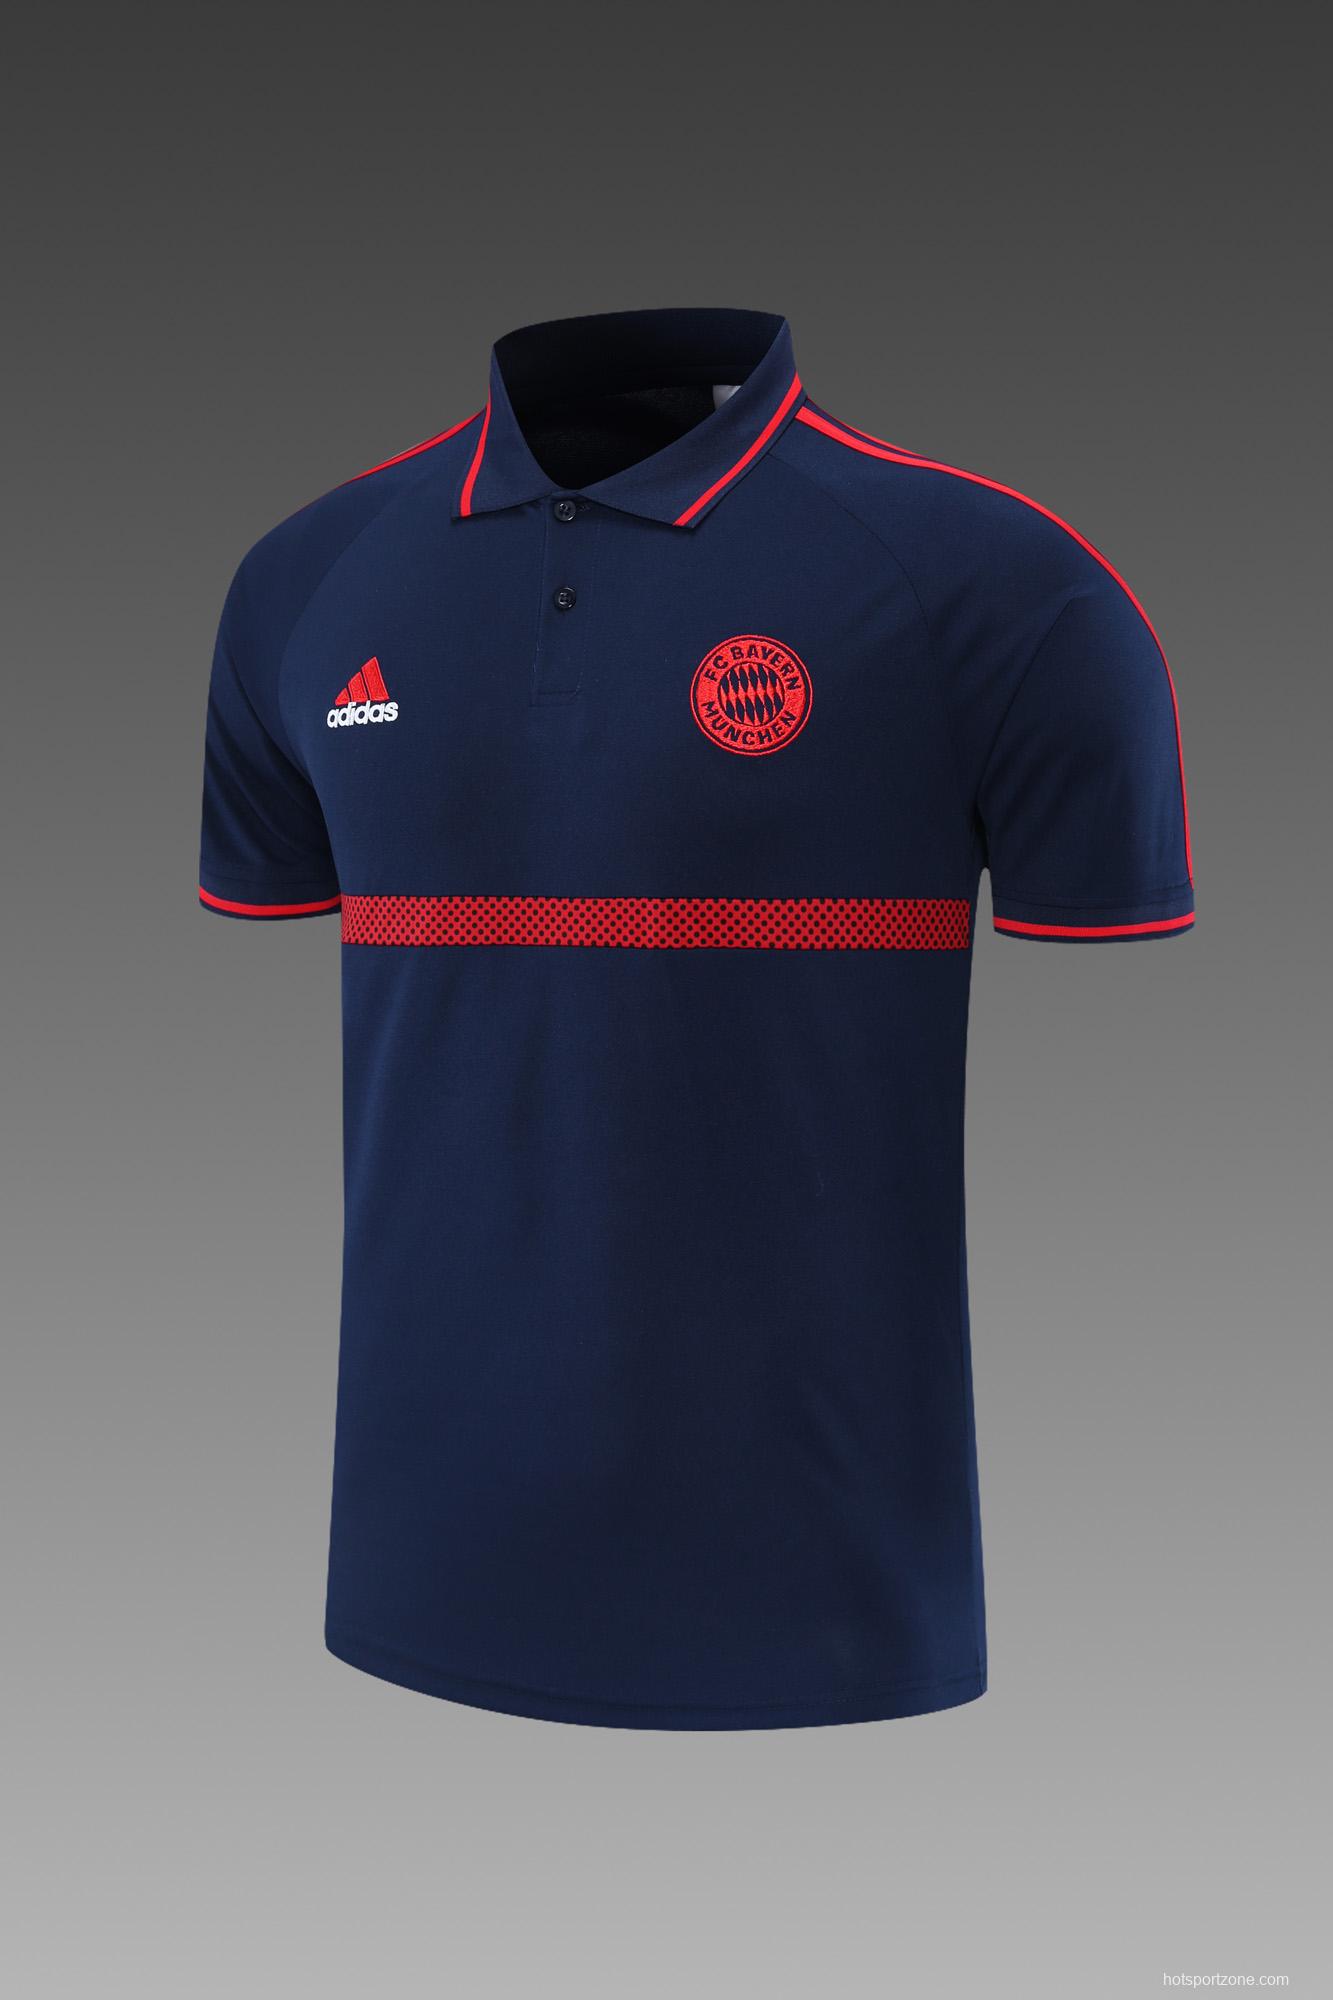 Bayern Munich POLO kit dark blue and red stripes (not supported to be sold separately)